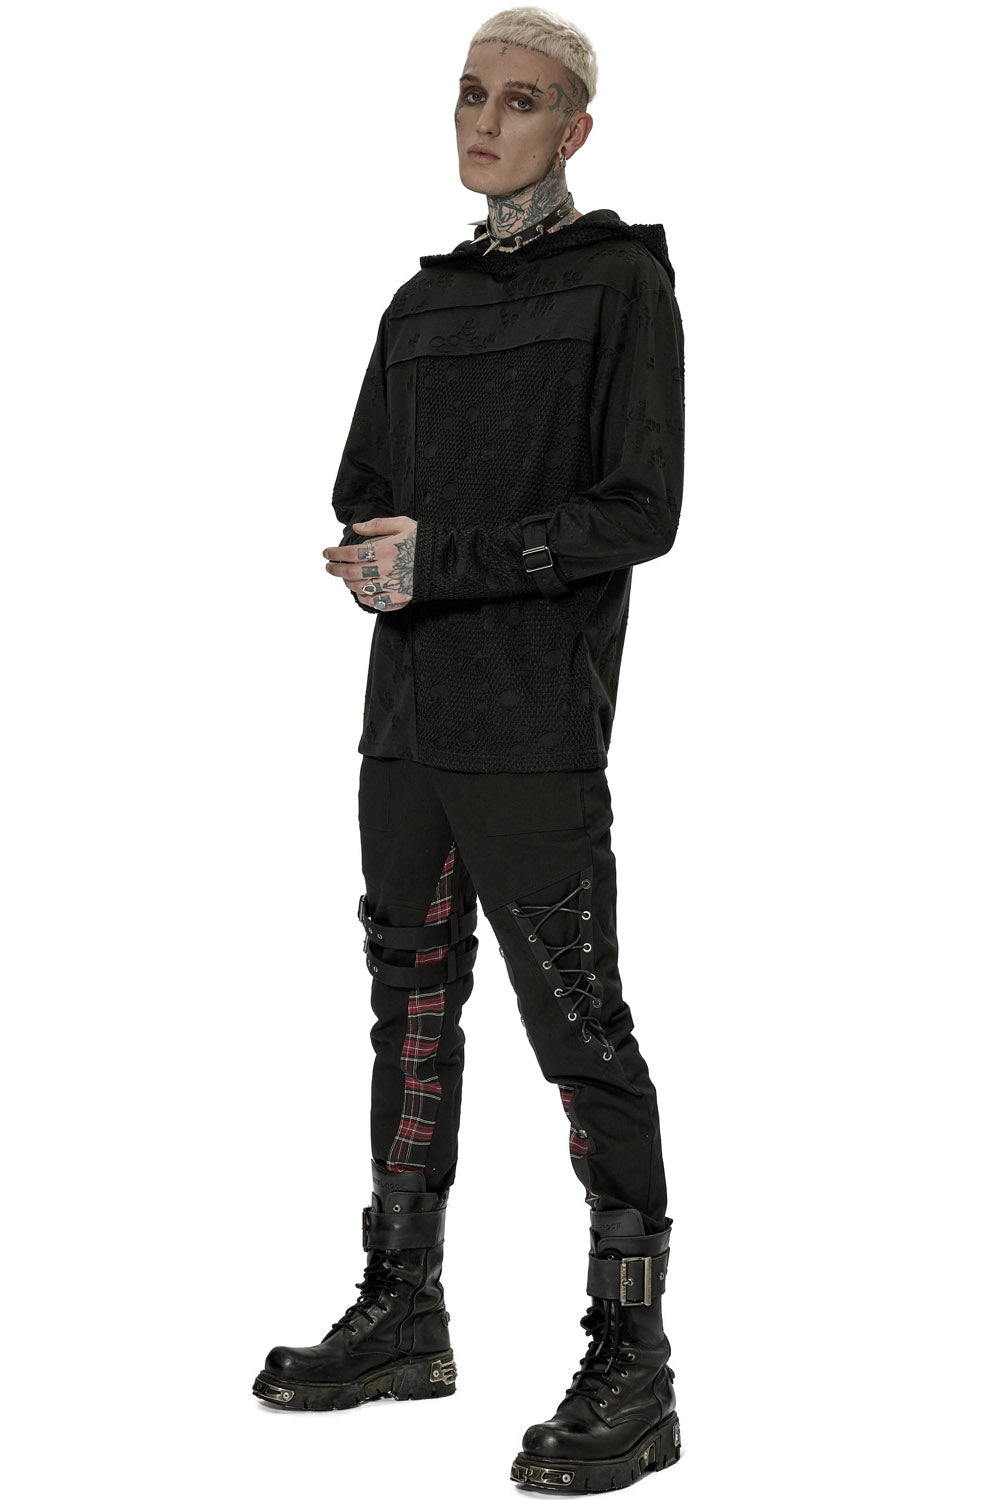 Haunter Distressed Hooded Top